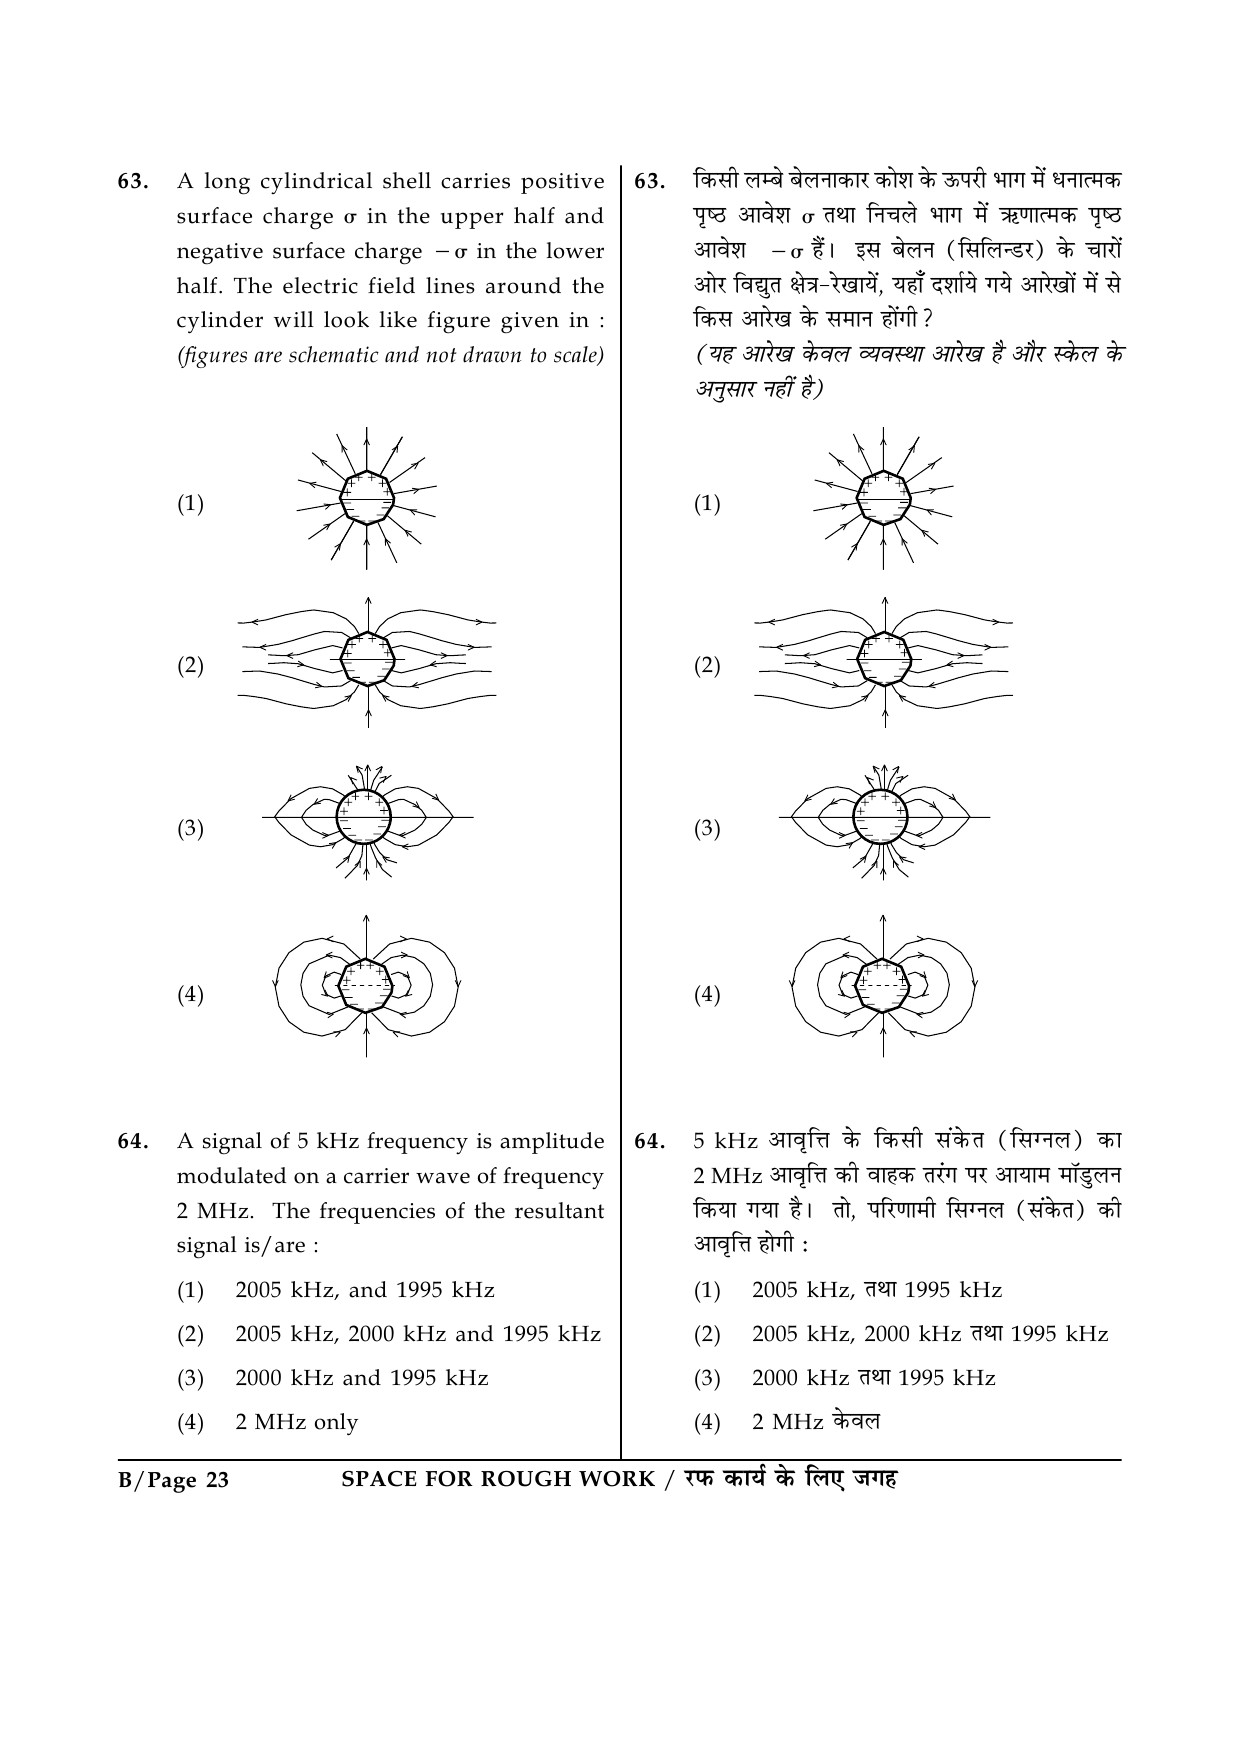 JEE Main Exam Question Paper 2015 Booklet B 23